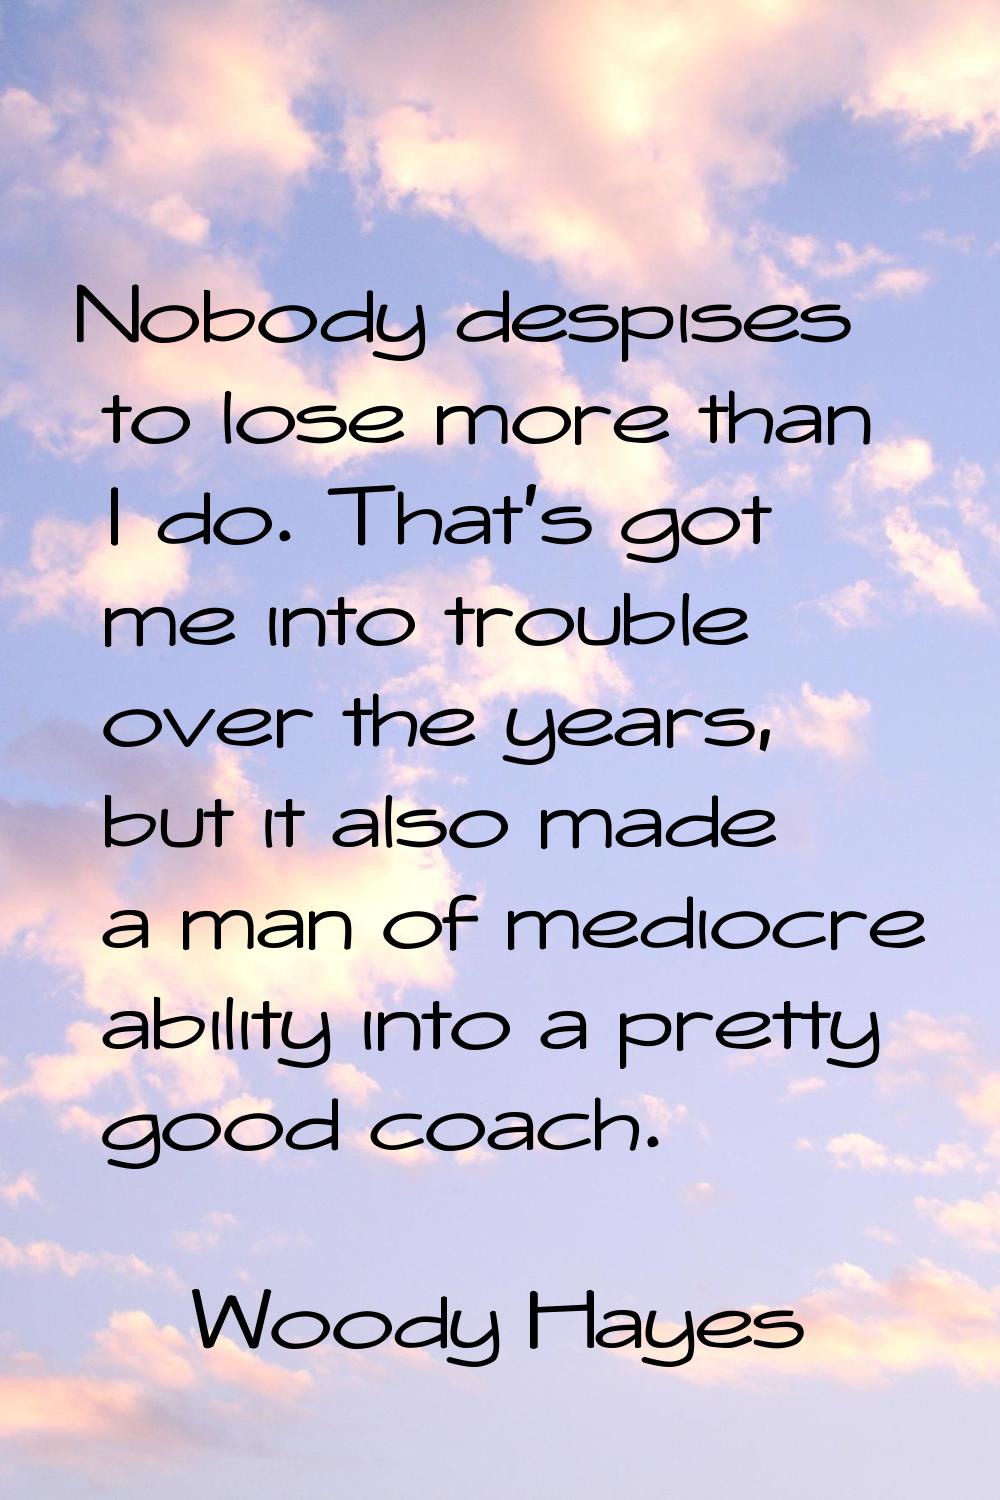 Nobody despises to lose more than I do. That's got me into trouble over the years, but it also made